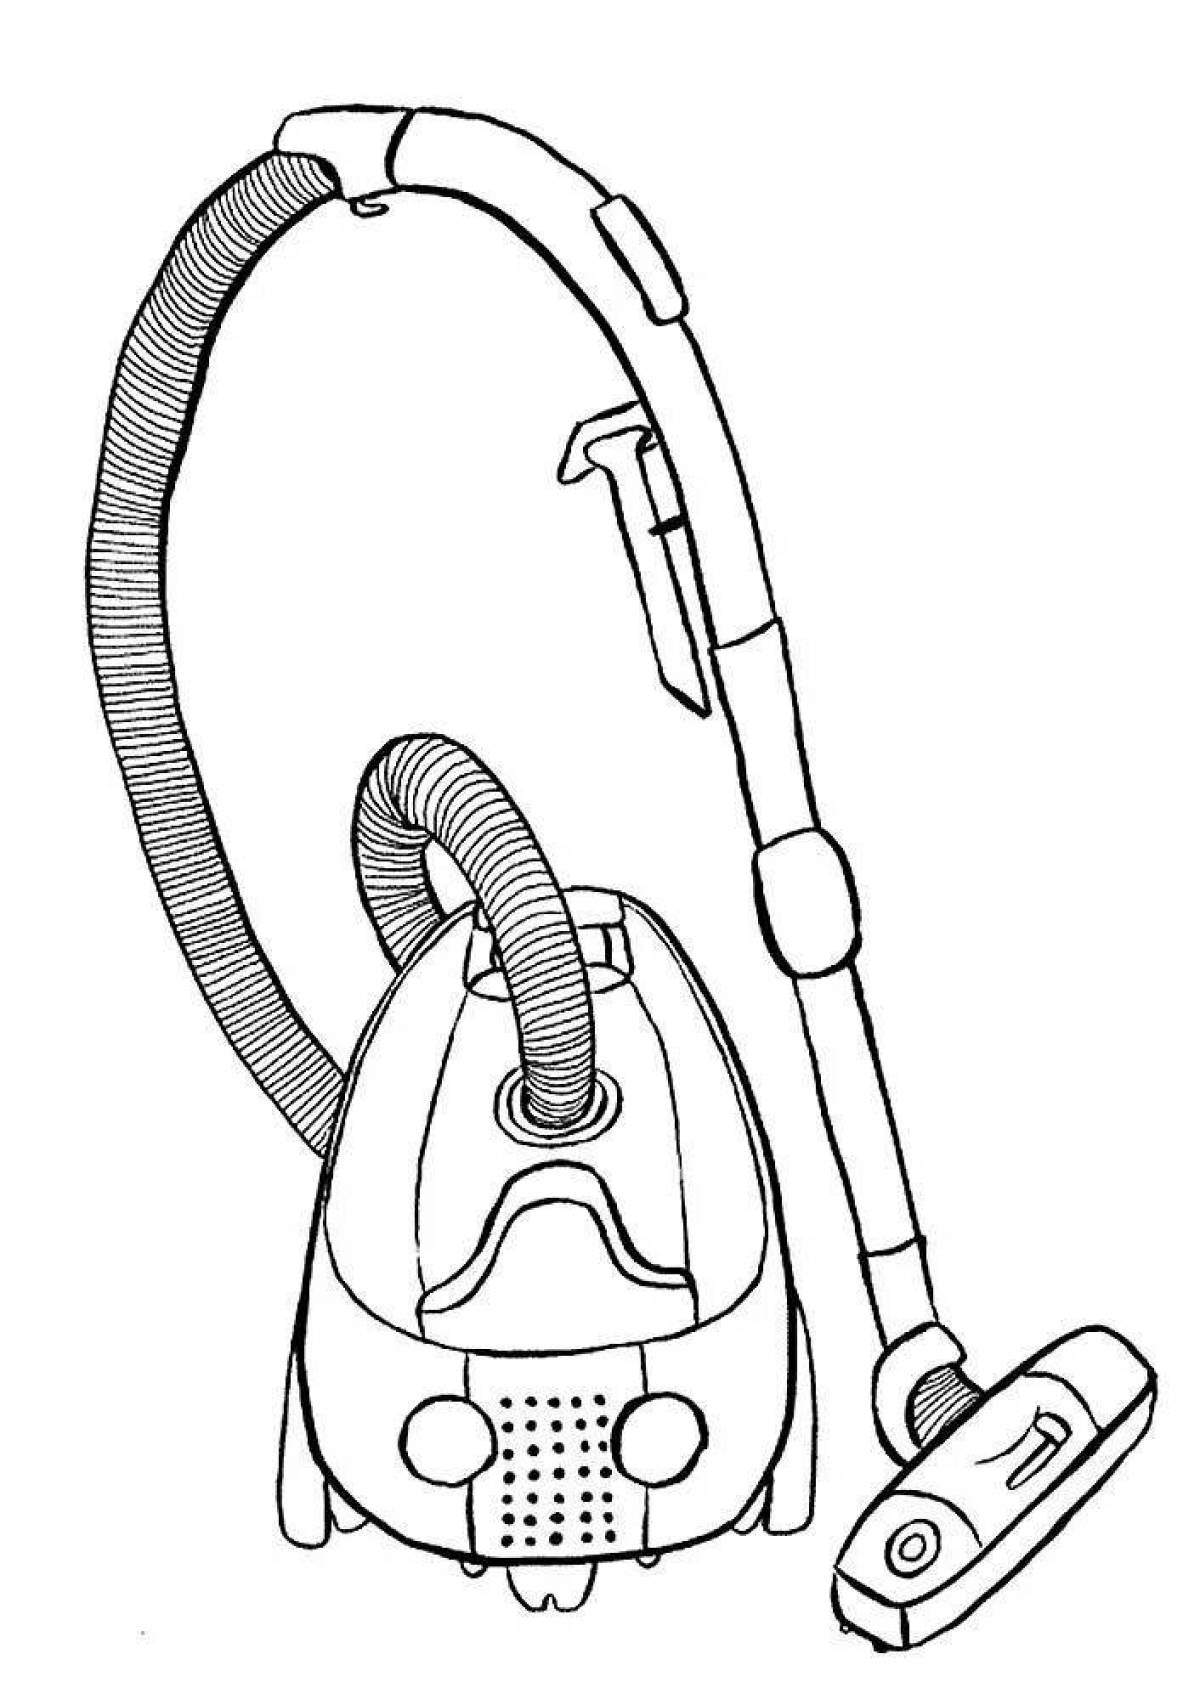 Funny vacuum cleaner coloring book for kids